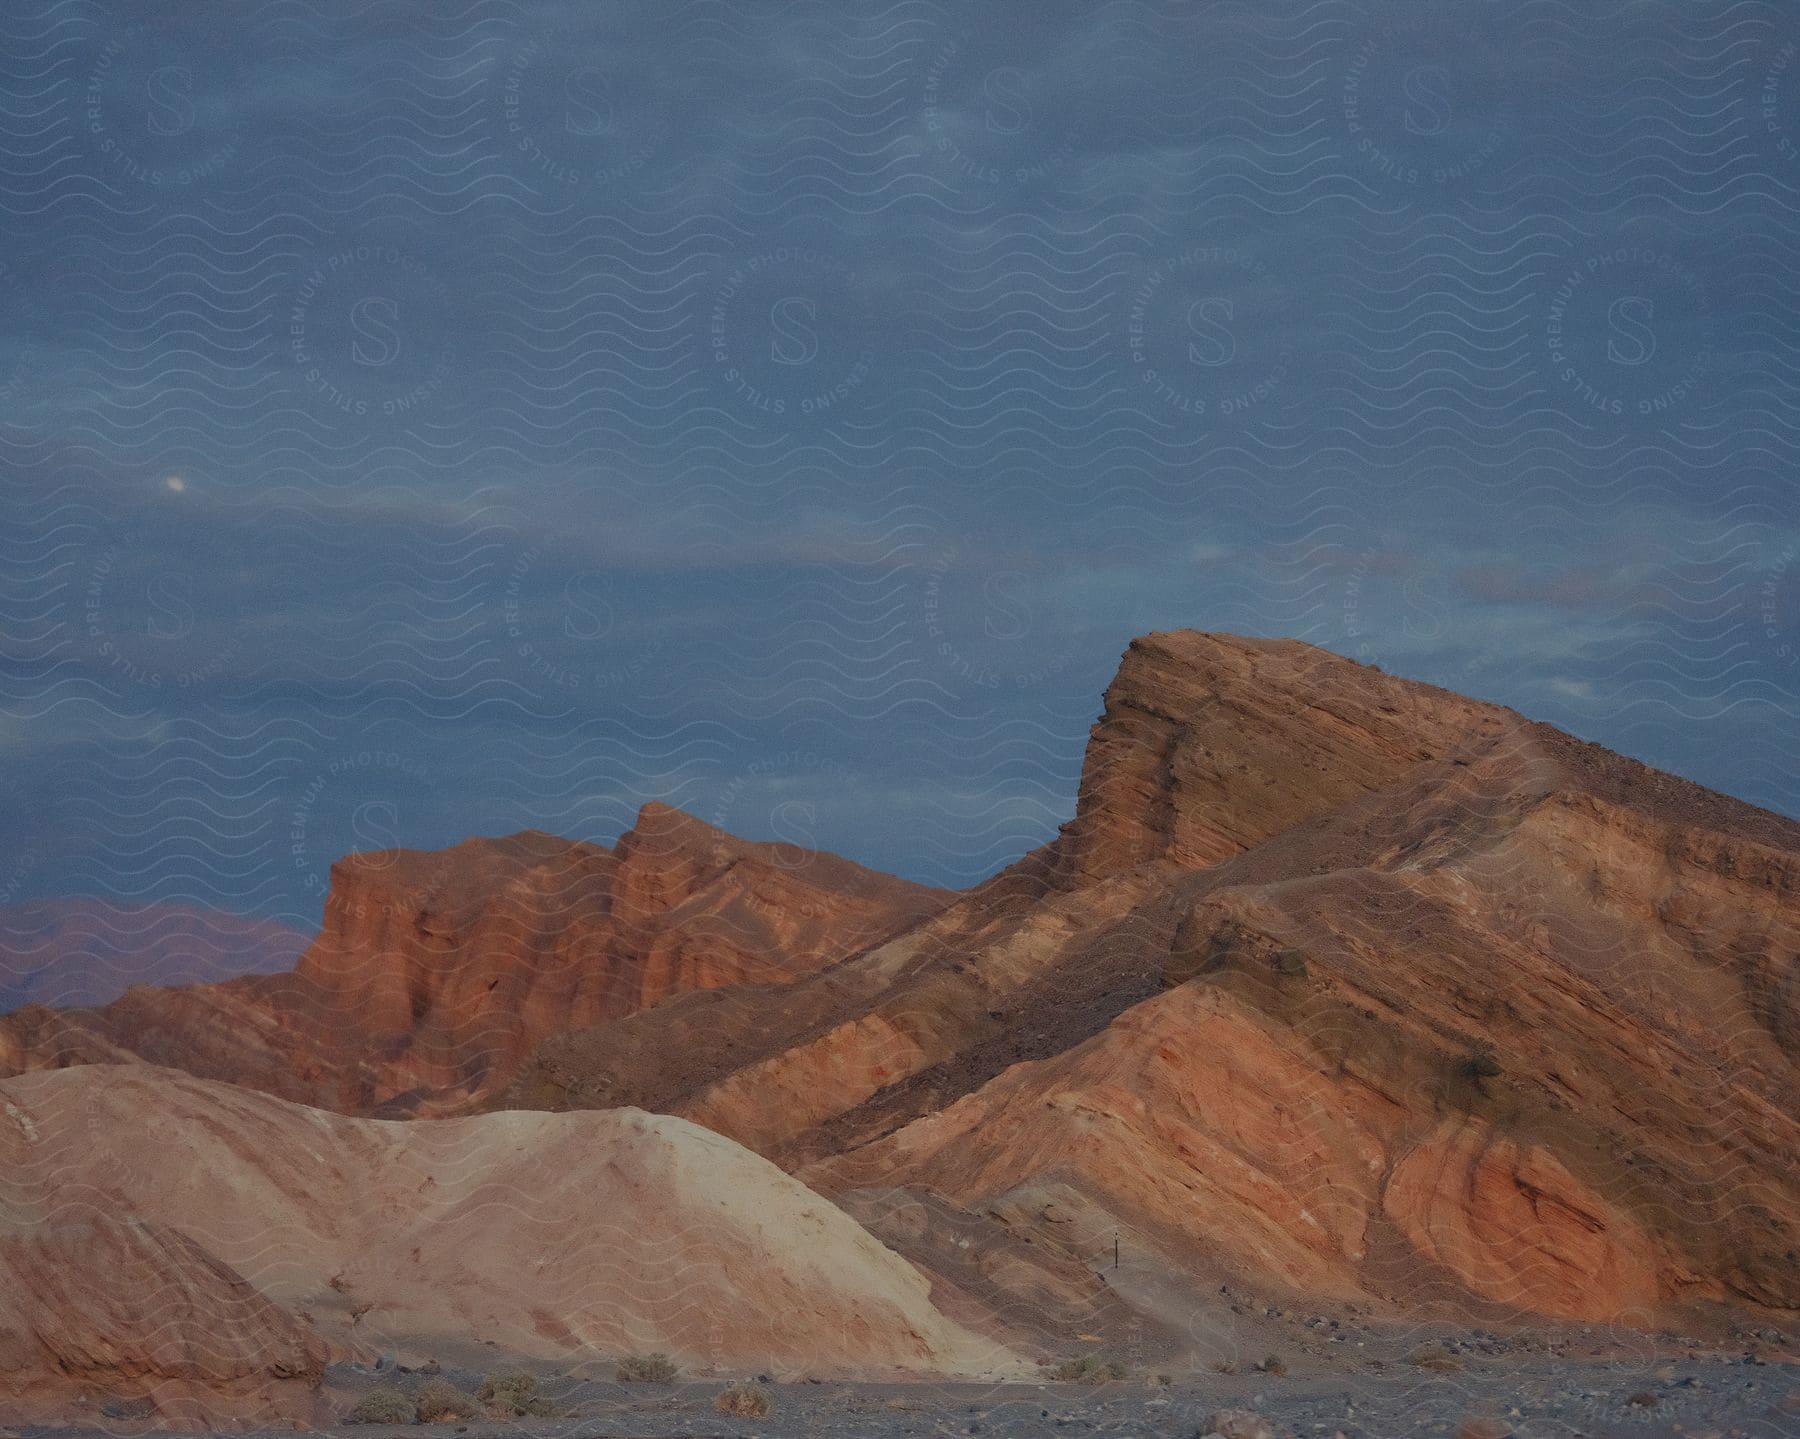 A mountain range of canyons during dusk in the desert.